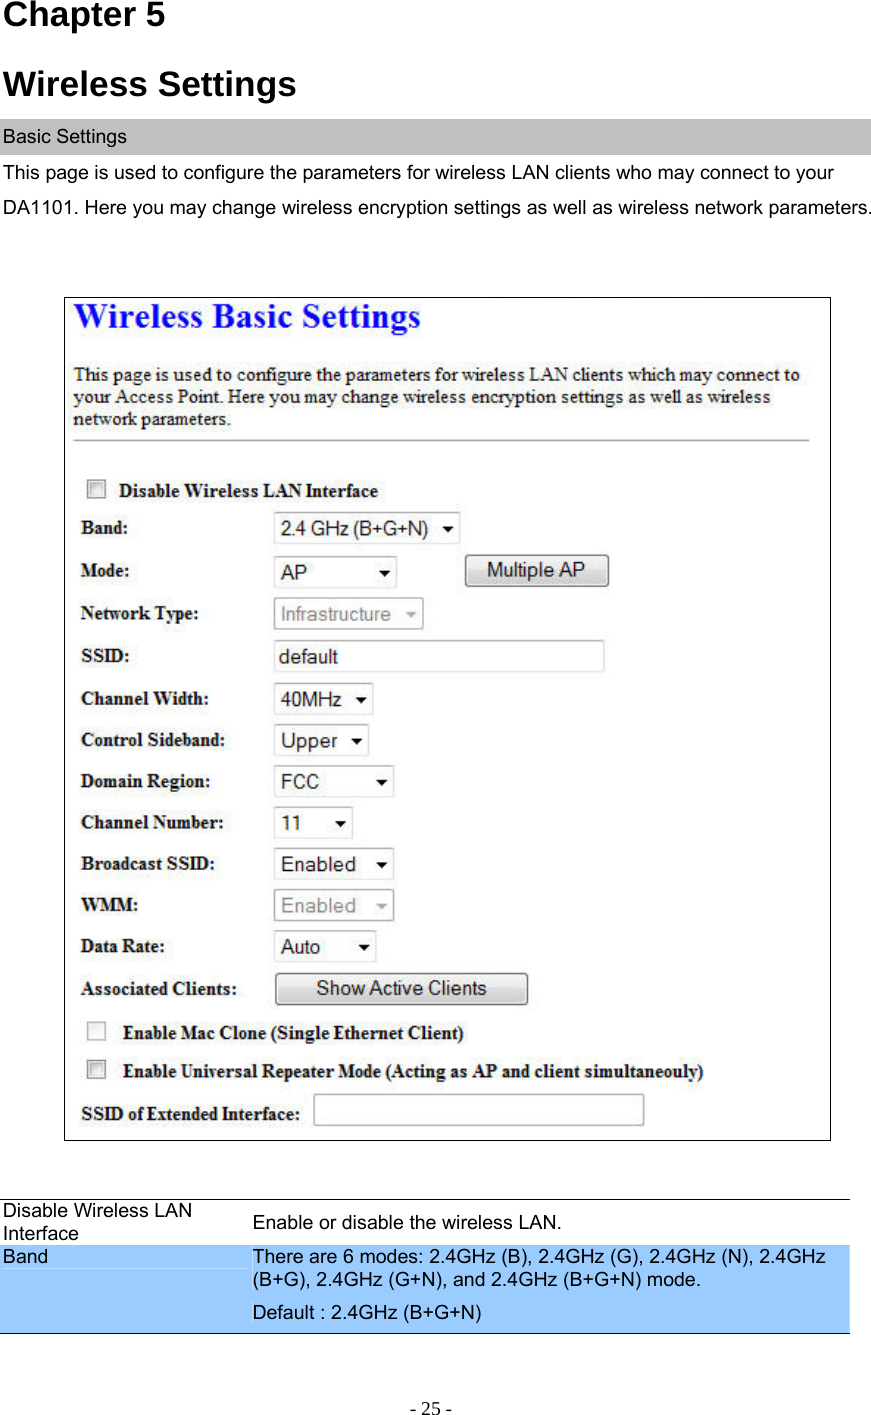 - 25 - Chapter 5 Wireless Settings Basic Settings This page is used to configure the parameters for wireless LAN clients who may connect to your DA1101. Here you may change wireless encryption settings as well as wireless network parameters.      Disable Wireless LAN Interface  Enable or disable the wireless LAN. Band  There are 6 modes: 2.4GHz (B), 2.4GHz (G), 2.4GHz (N), 2.4GHz (B+G), 2.4GHz (G+N), and 2.4GHz (B+G+N) mode. Default : 2.4GHz (B+G+N) 